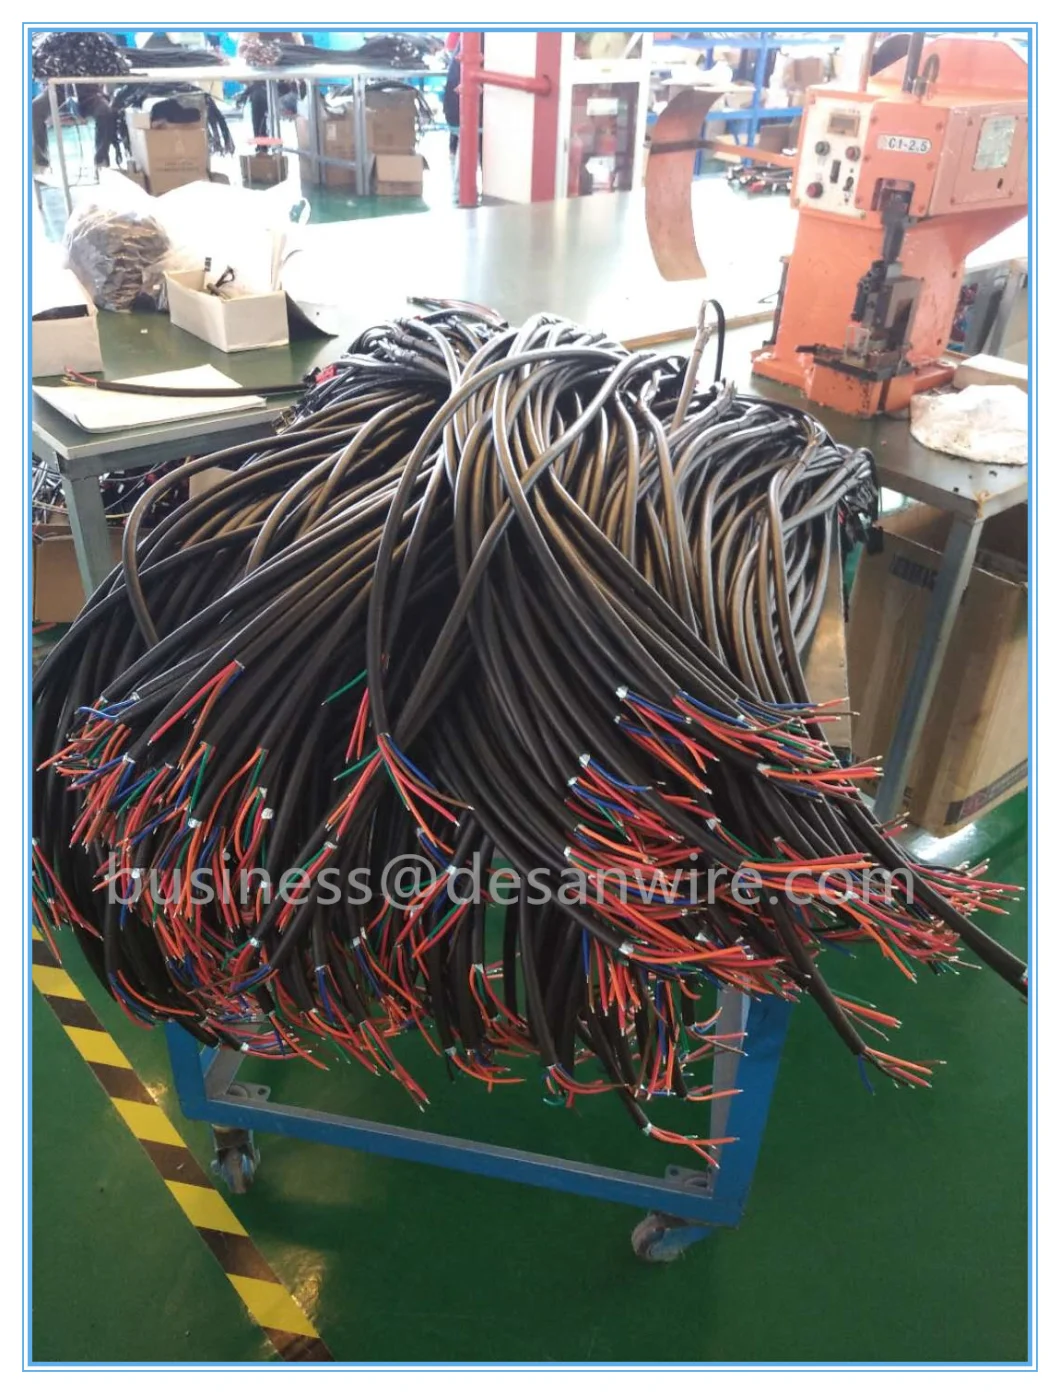 Assembly Processing Customization Industrial Intelligent Robot Automotive Medical Wiring Wire Harness